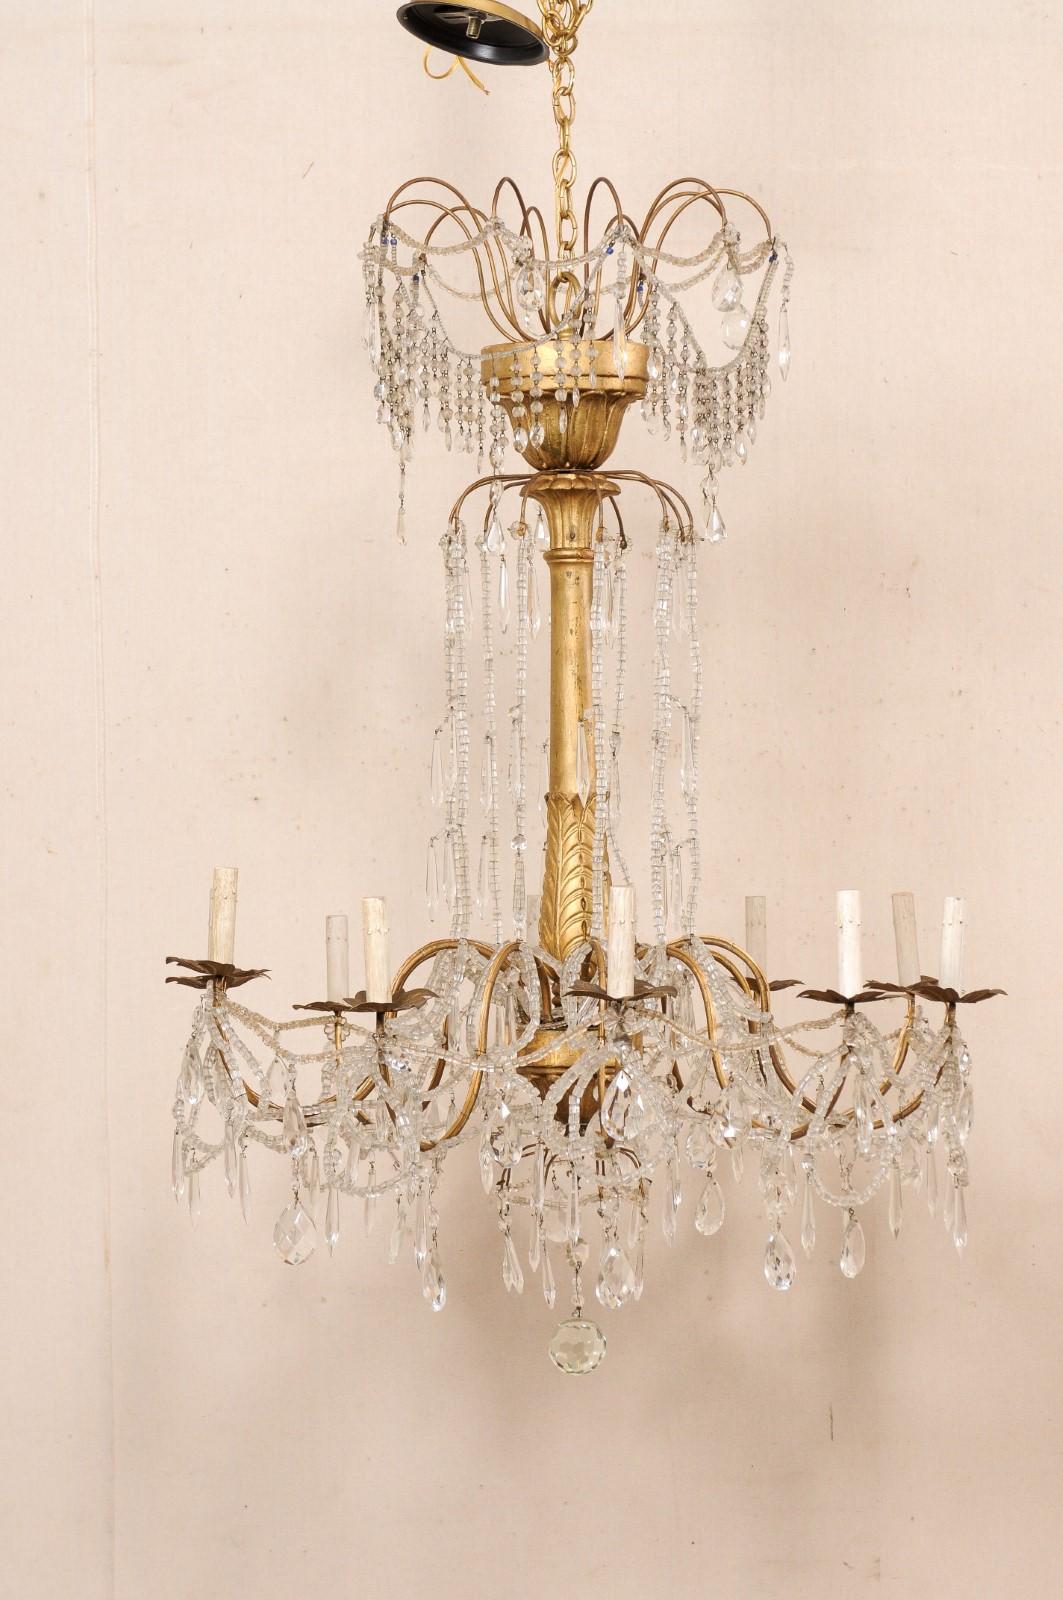 An Italian crystal and gilt wood column chandelier from the mid 20th century. This mid-century hanging light from Italy features a gilt-wood central column, adorn with leaved-wraps carved about it's lower gallery and floral wraps about the top and